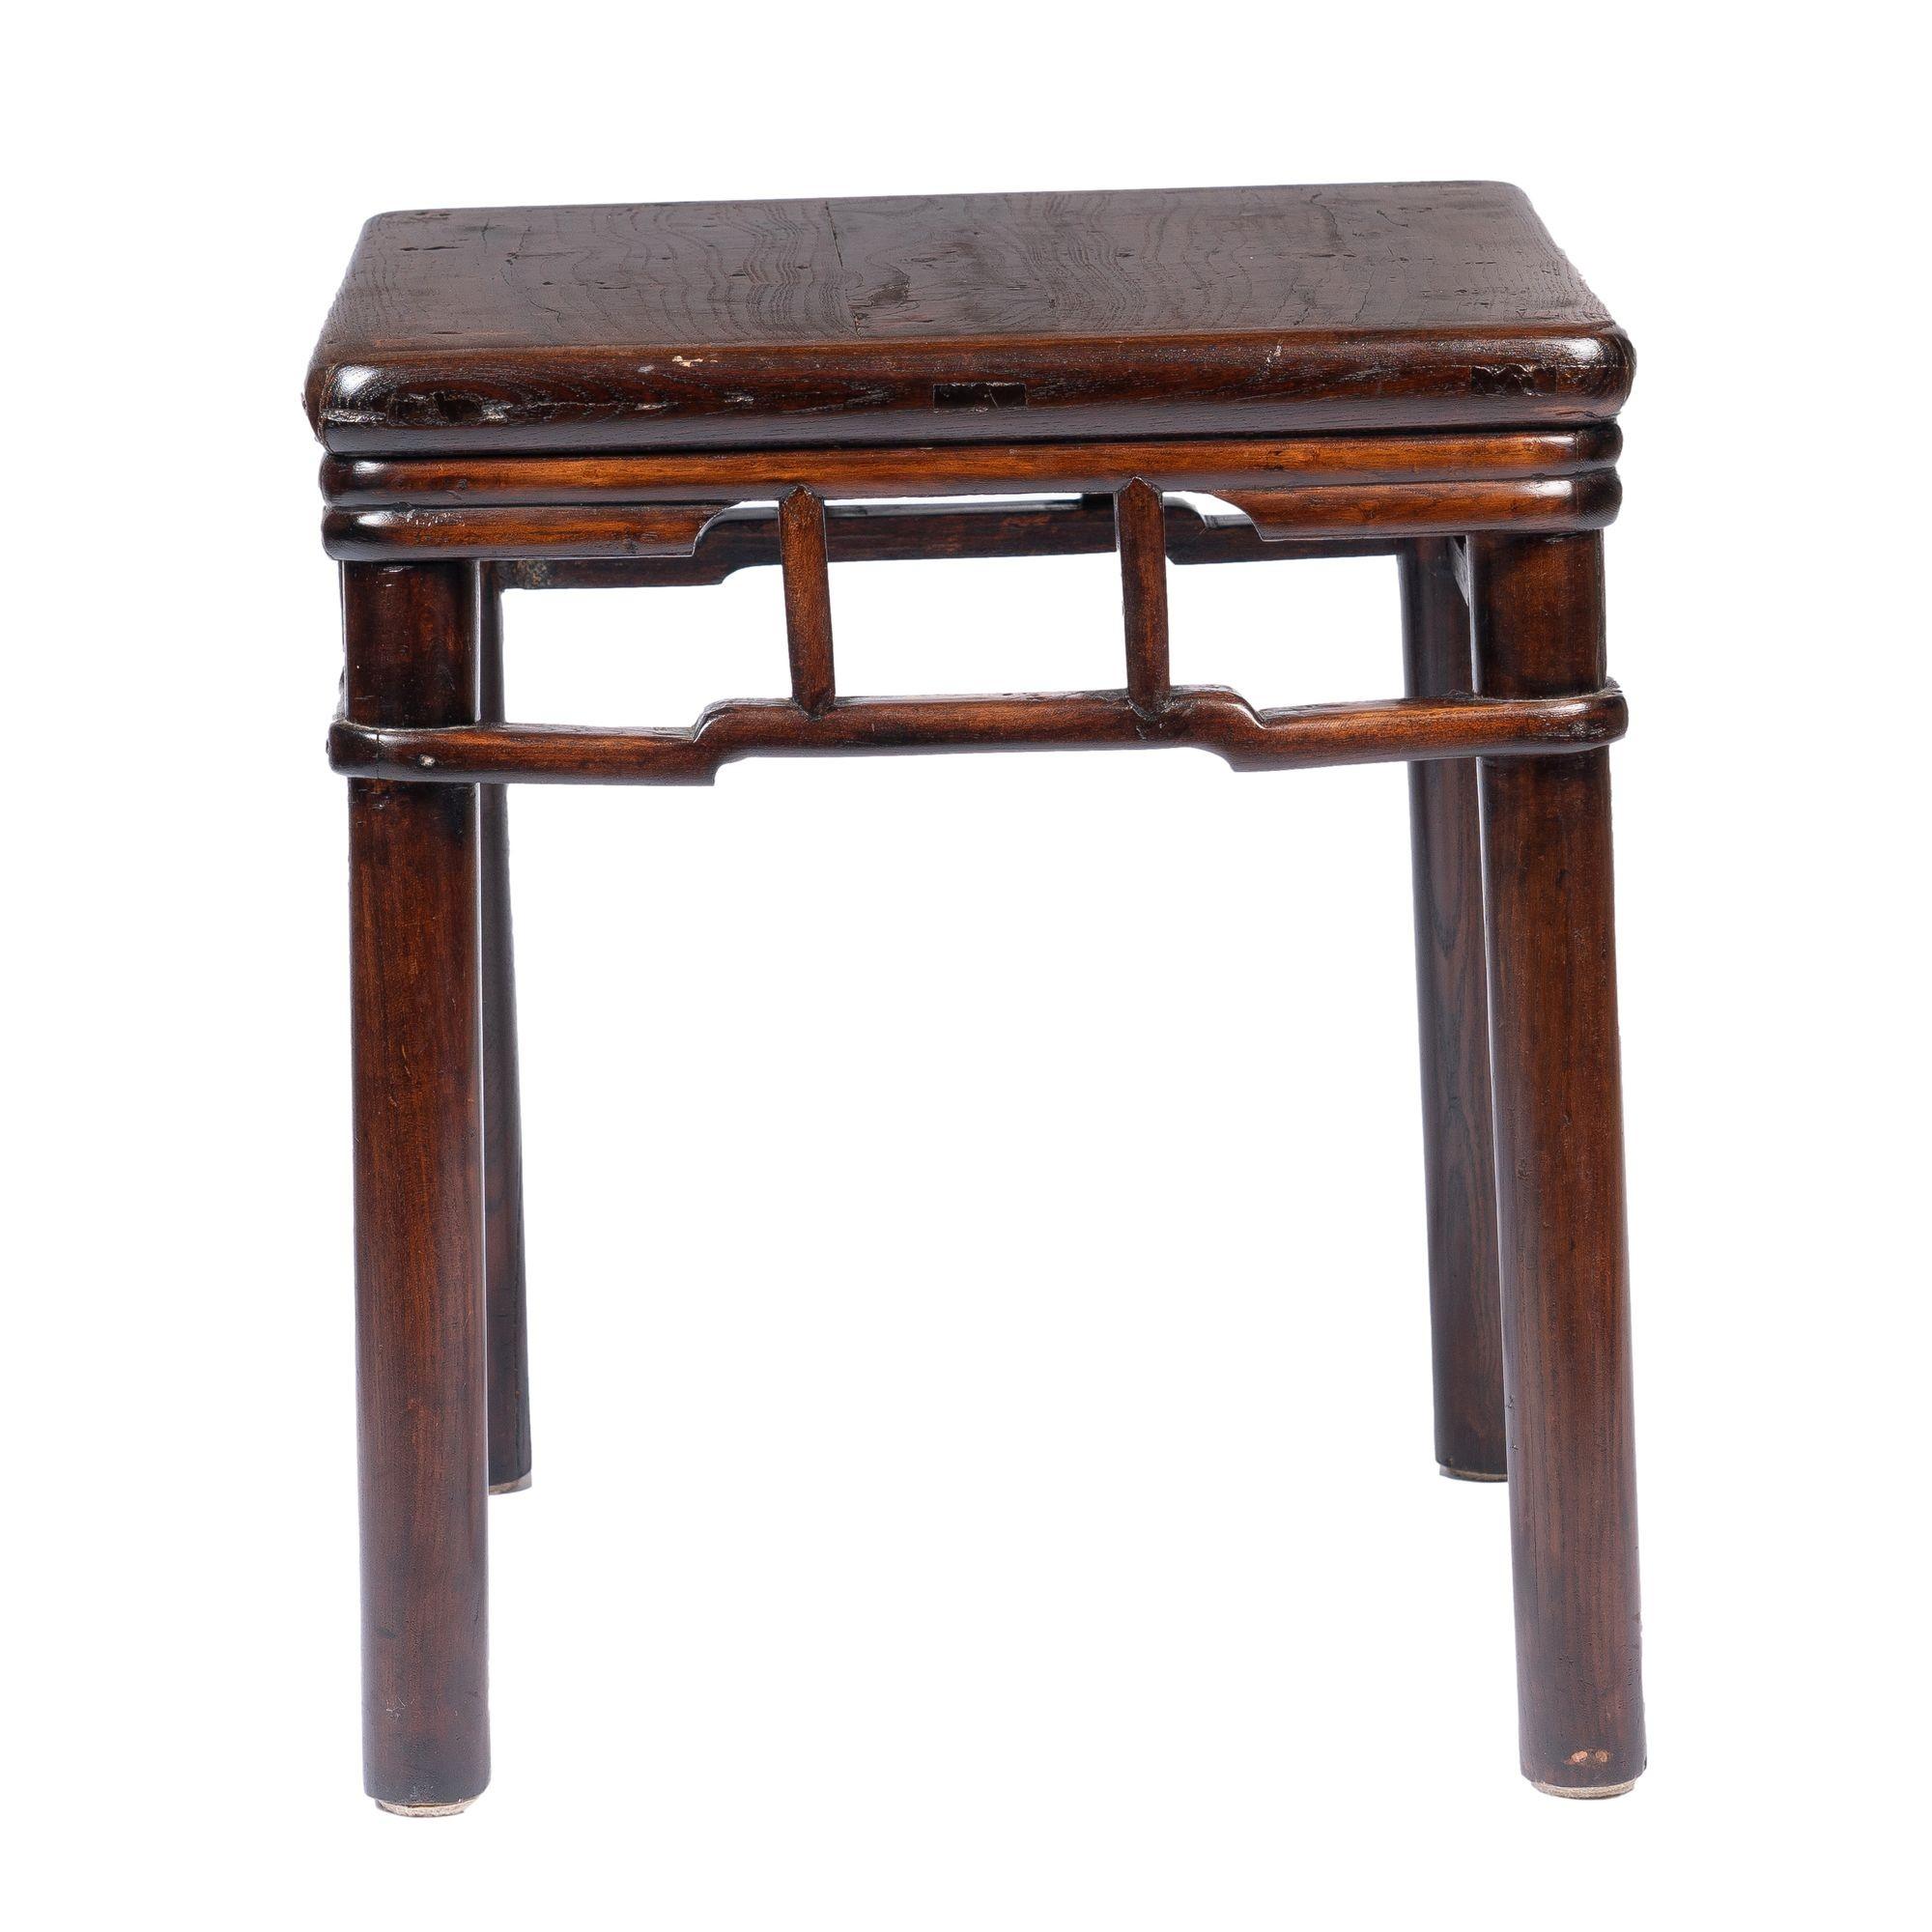 Pair of Chinese Elm Stools with Hump Back Rail, 1780-1820 For Sale 4